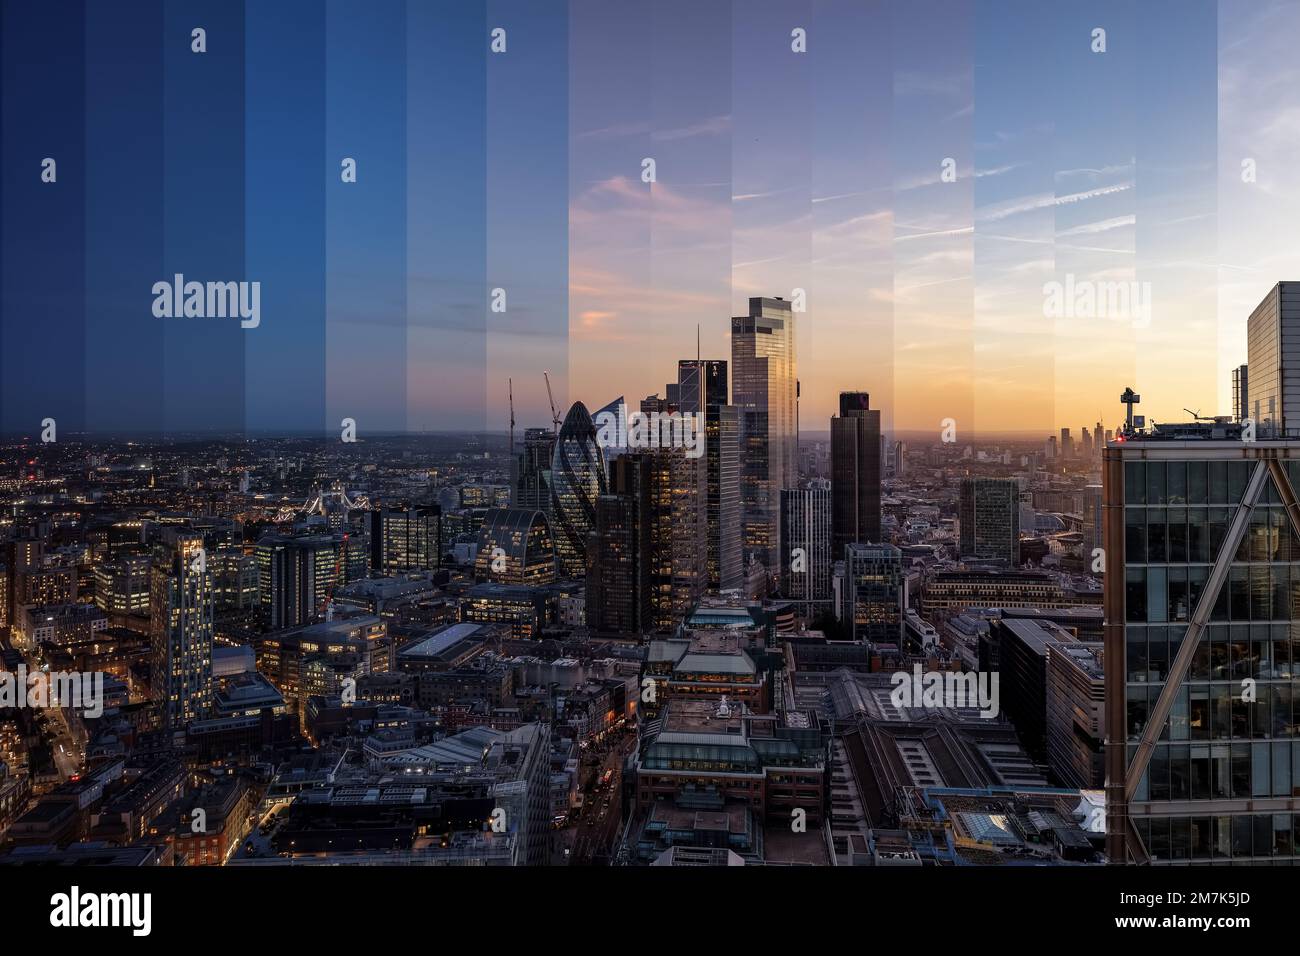 Sliced day to night time lapse view of the financial office skyscrapers at the City of London Stock Photo